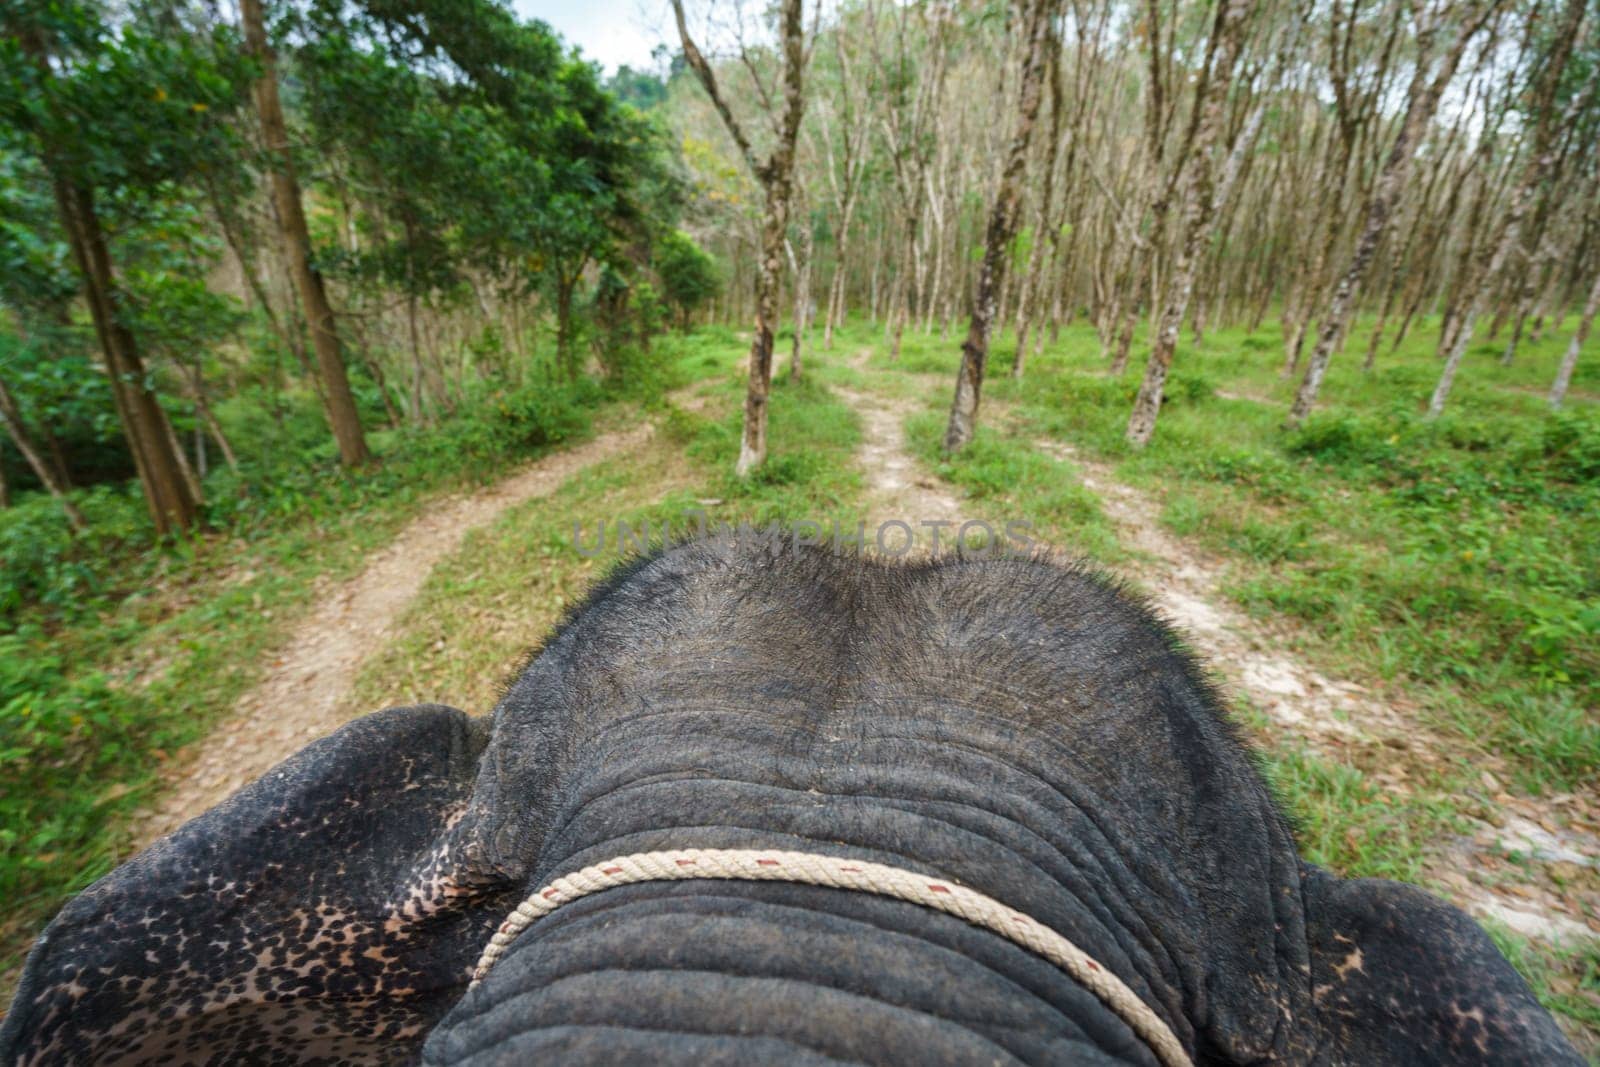 View from back of elephant on tropical forest by rivertime